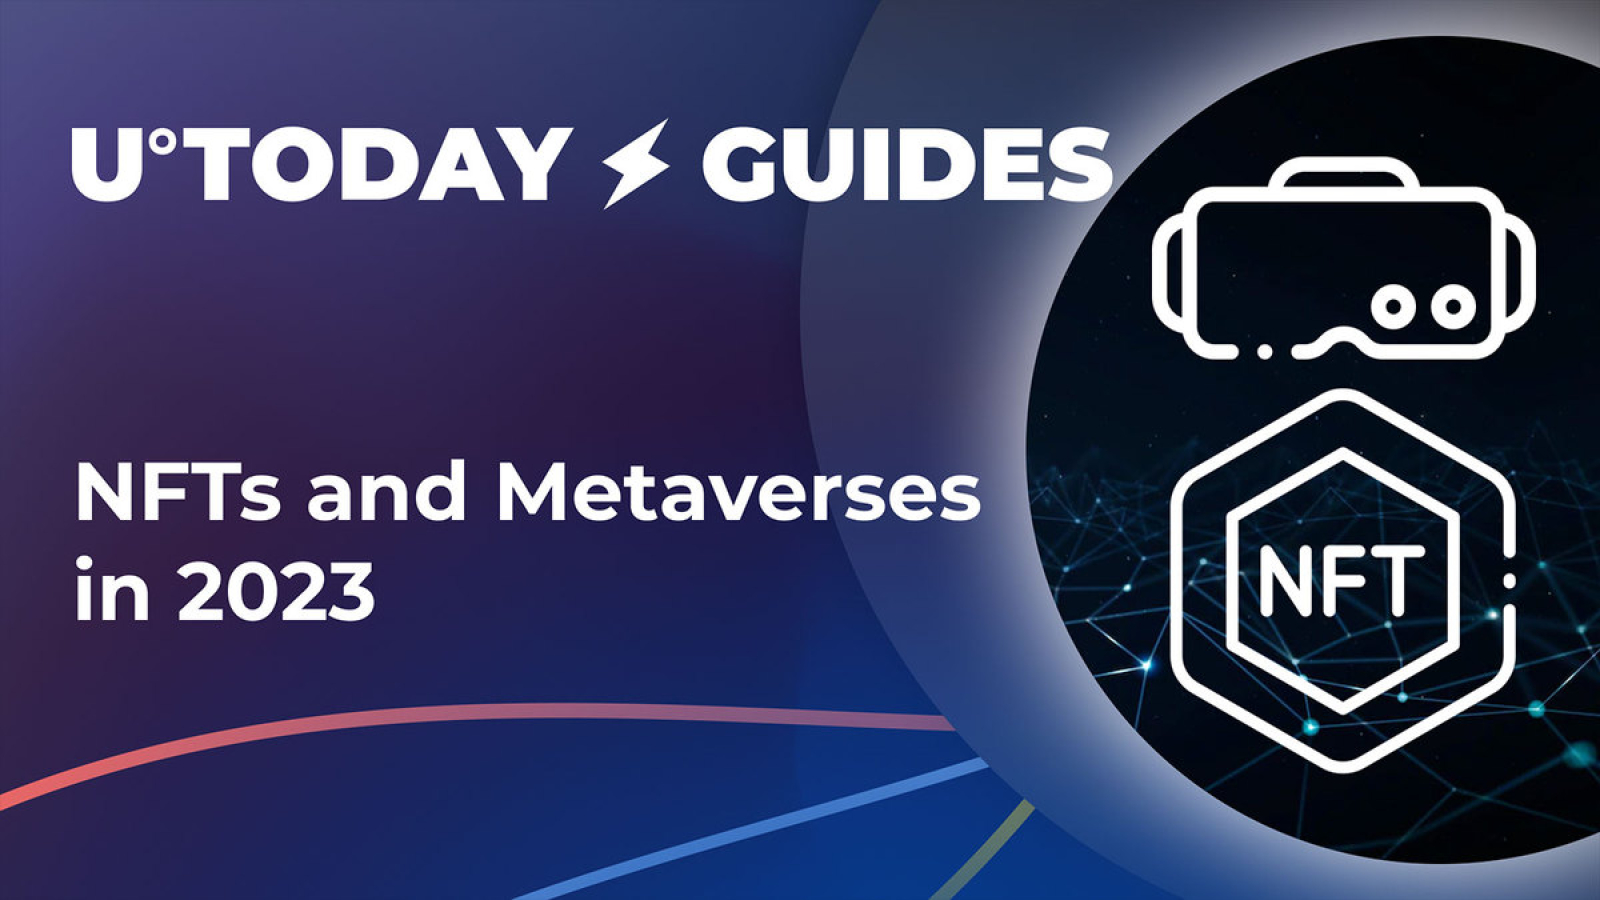 NFTs and Metaverses in 2023: Comprehensive Guide